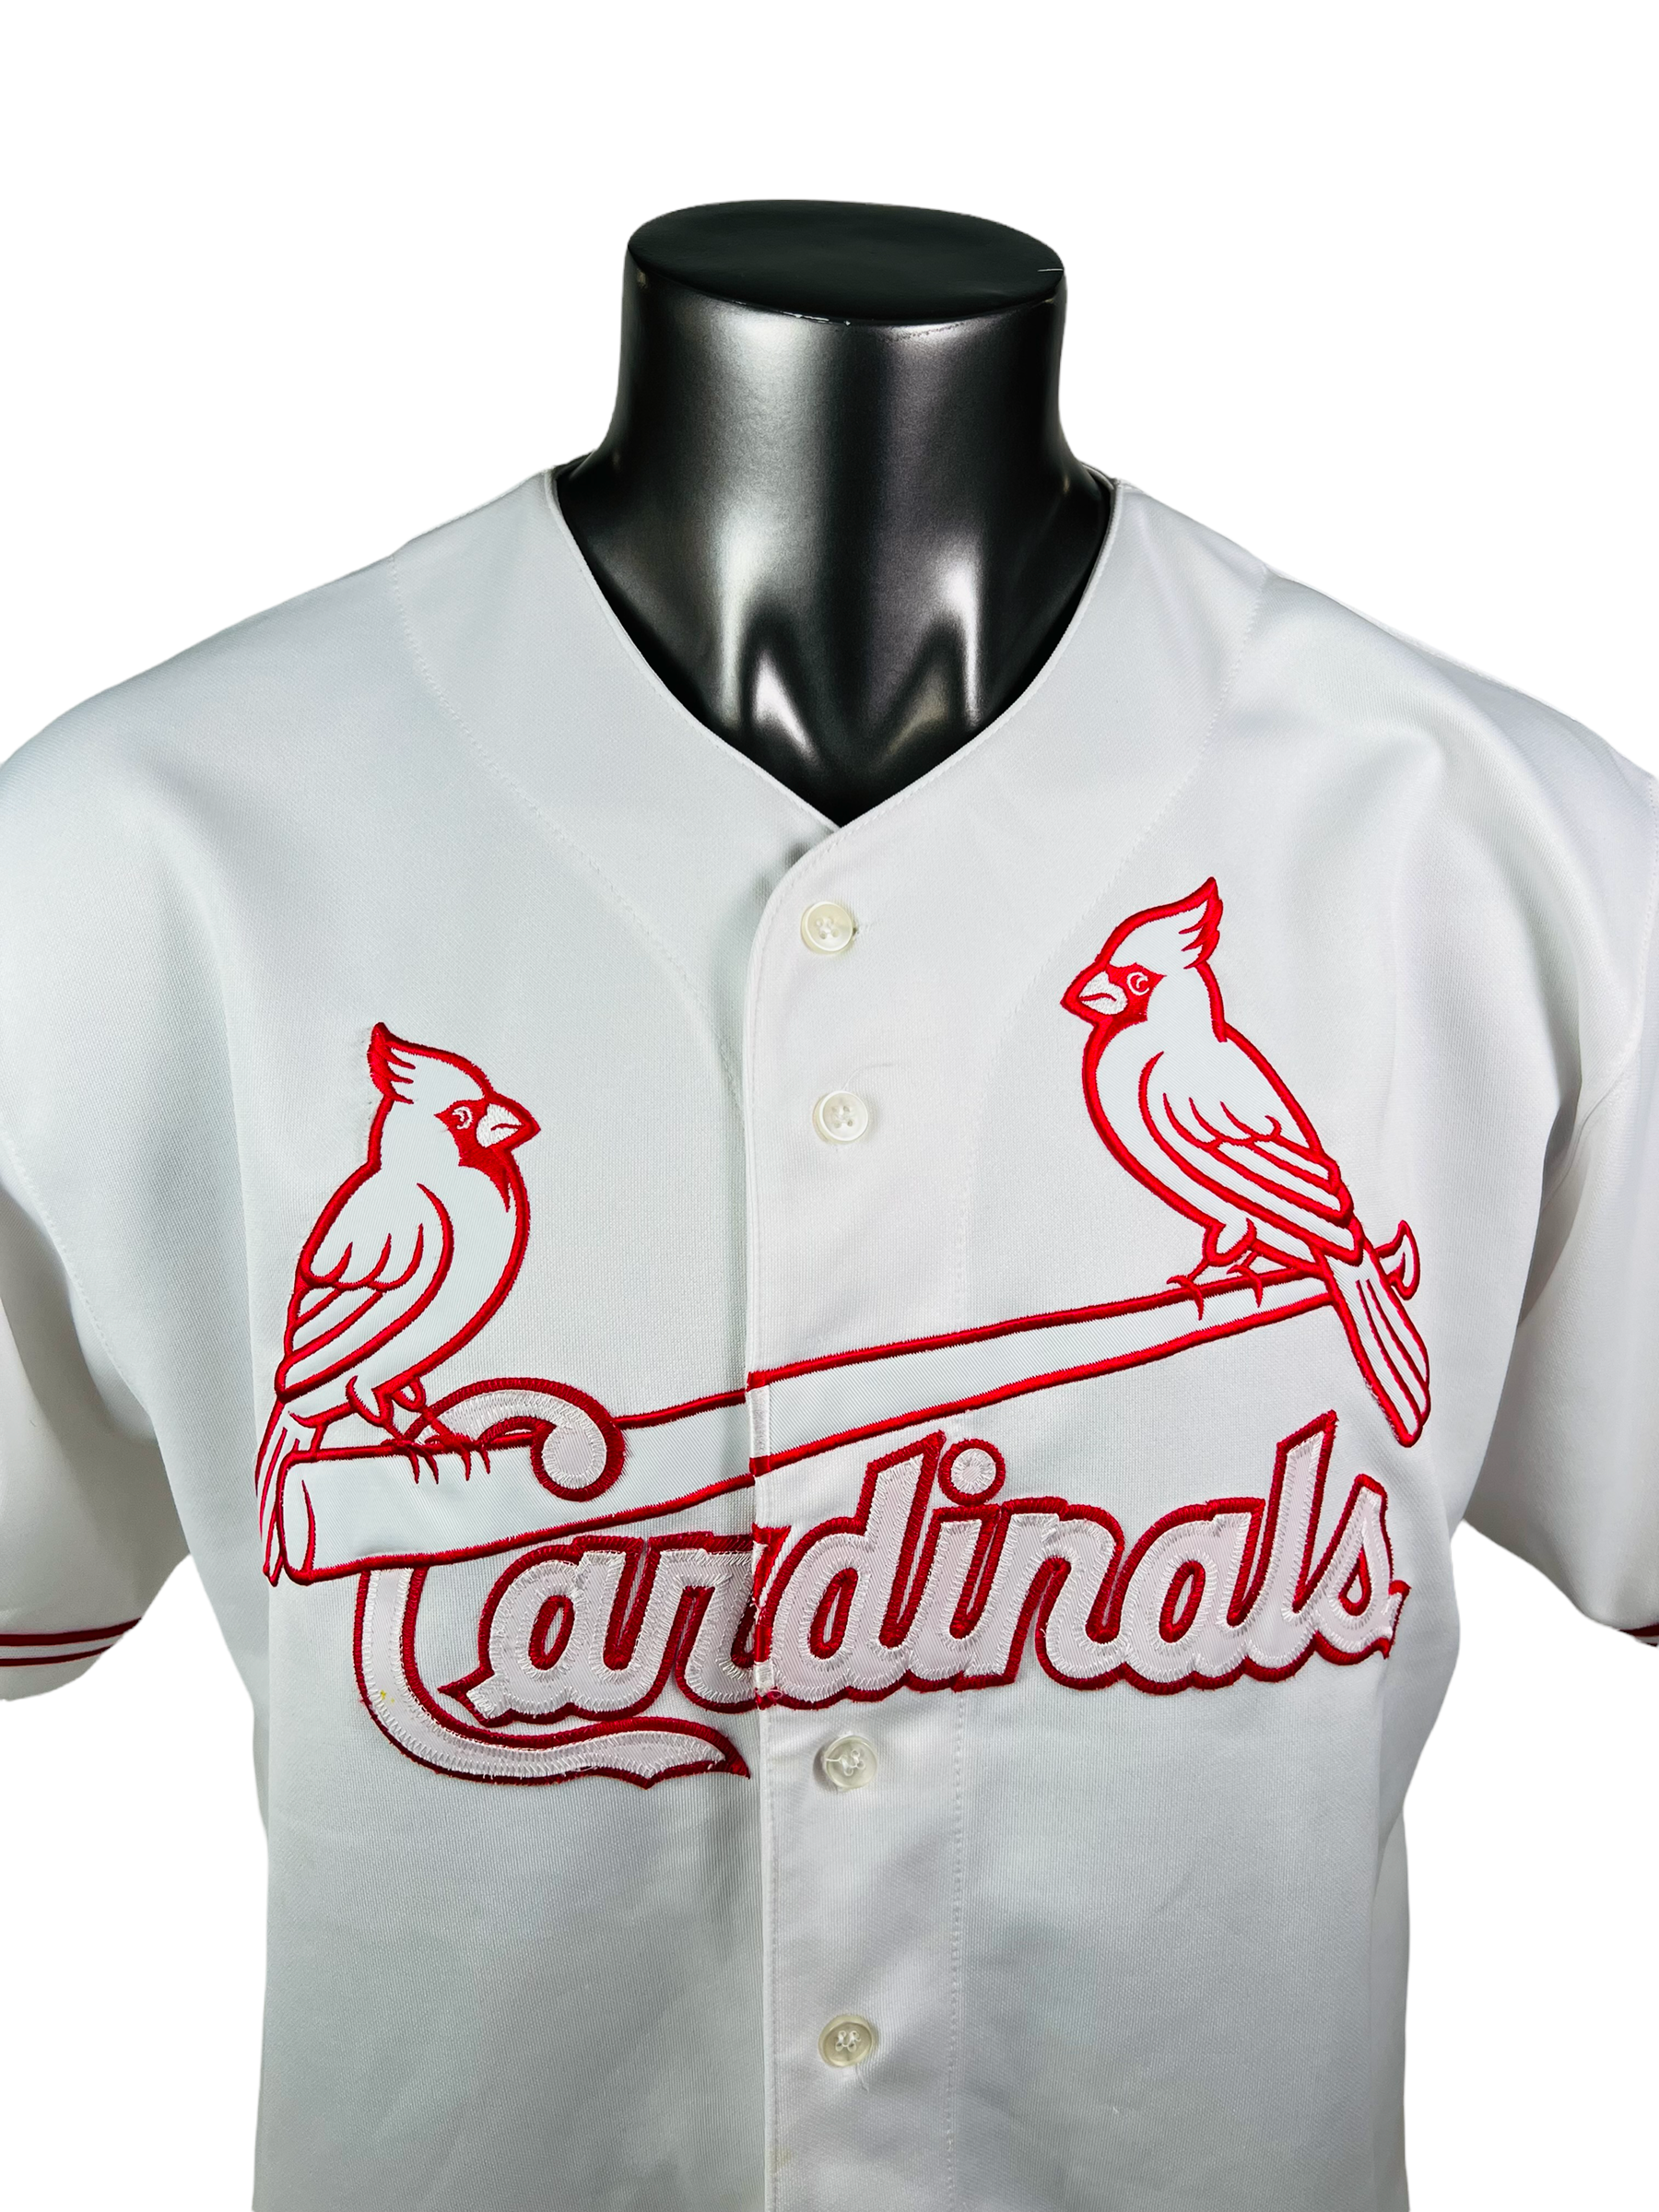 ST. LOUIS CARDINALS VINTAGE 1990'S RUSSELL ATHLETIC JERSEY ADULT LARGE -  Bucks County Baseball Co.